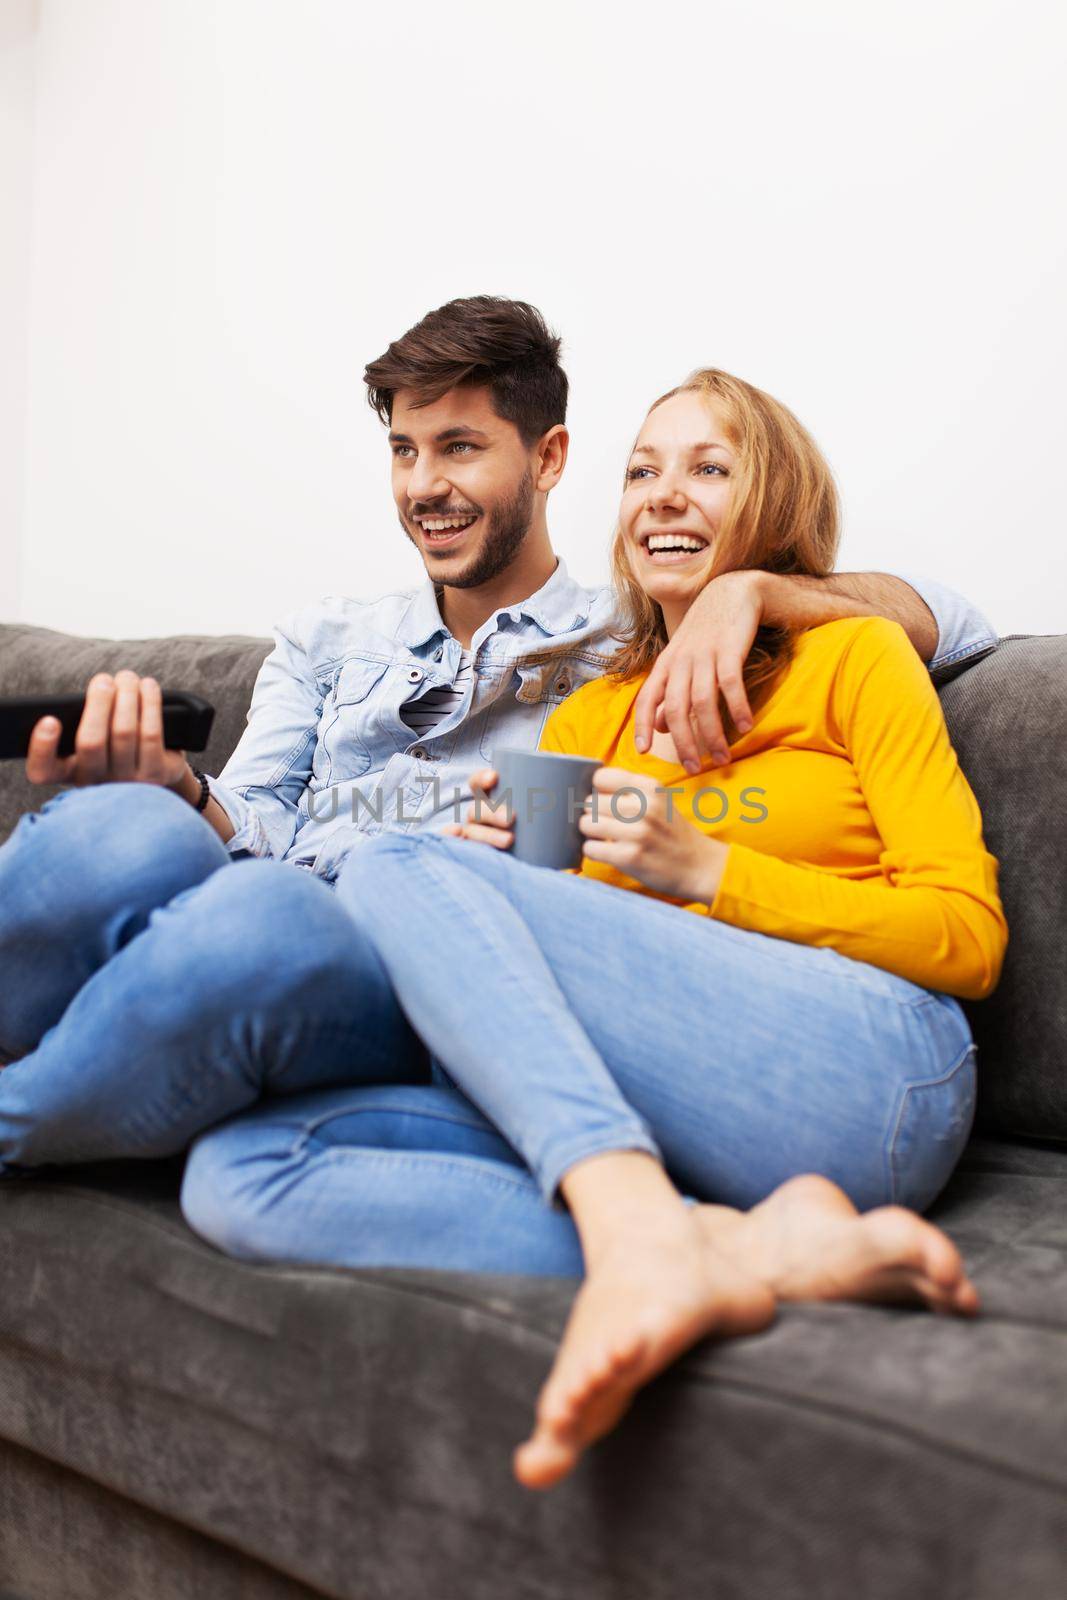 couple in love on a sofa at home, watching tv and smiling by kokimk